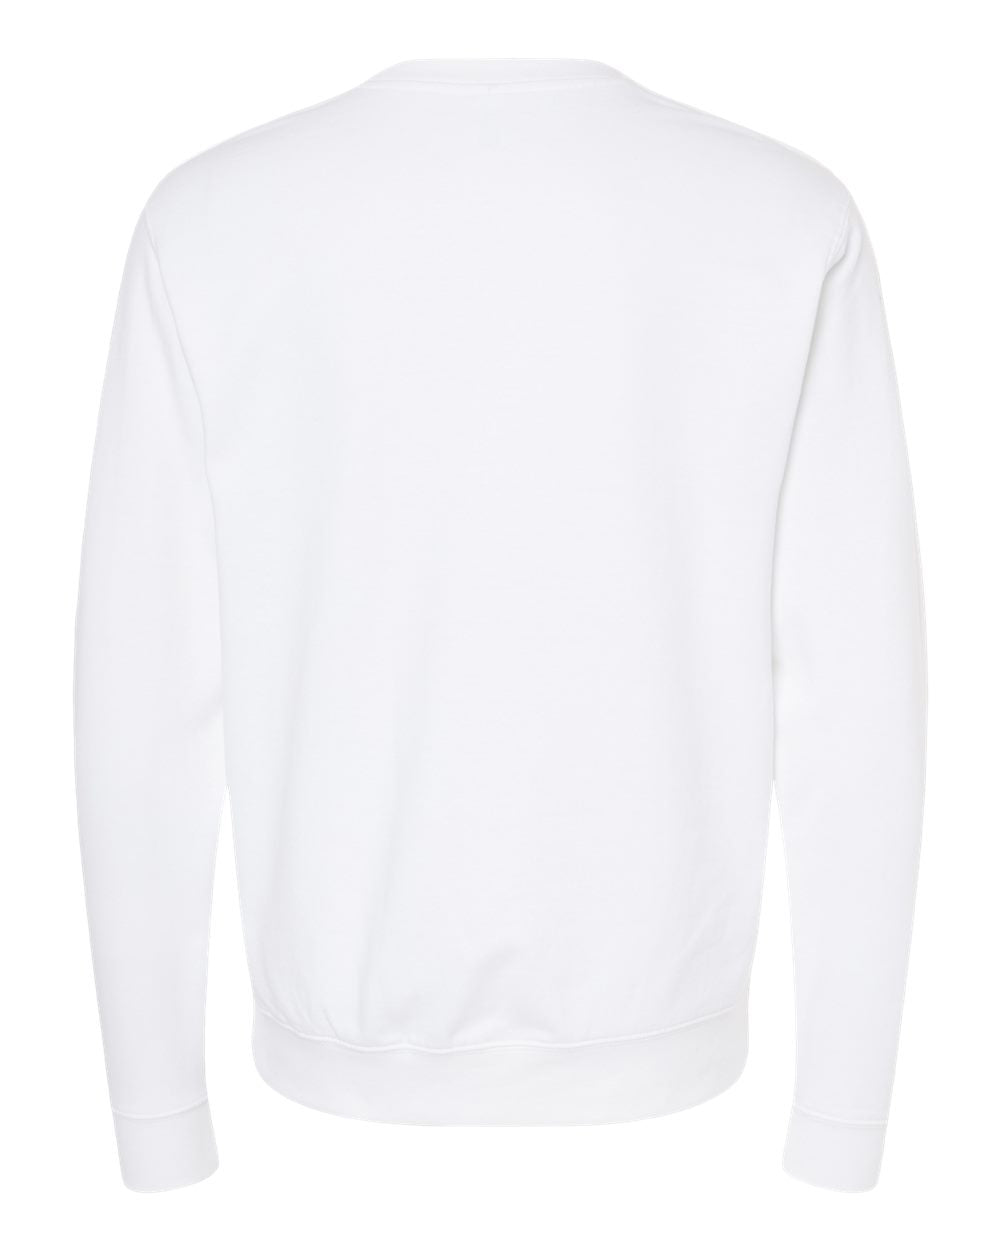 Independent Trading Co. Midweight Sweatshirt SS3000 #color_White